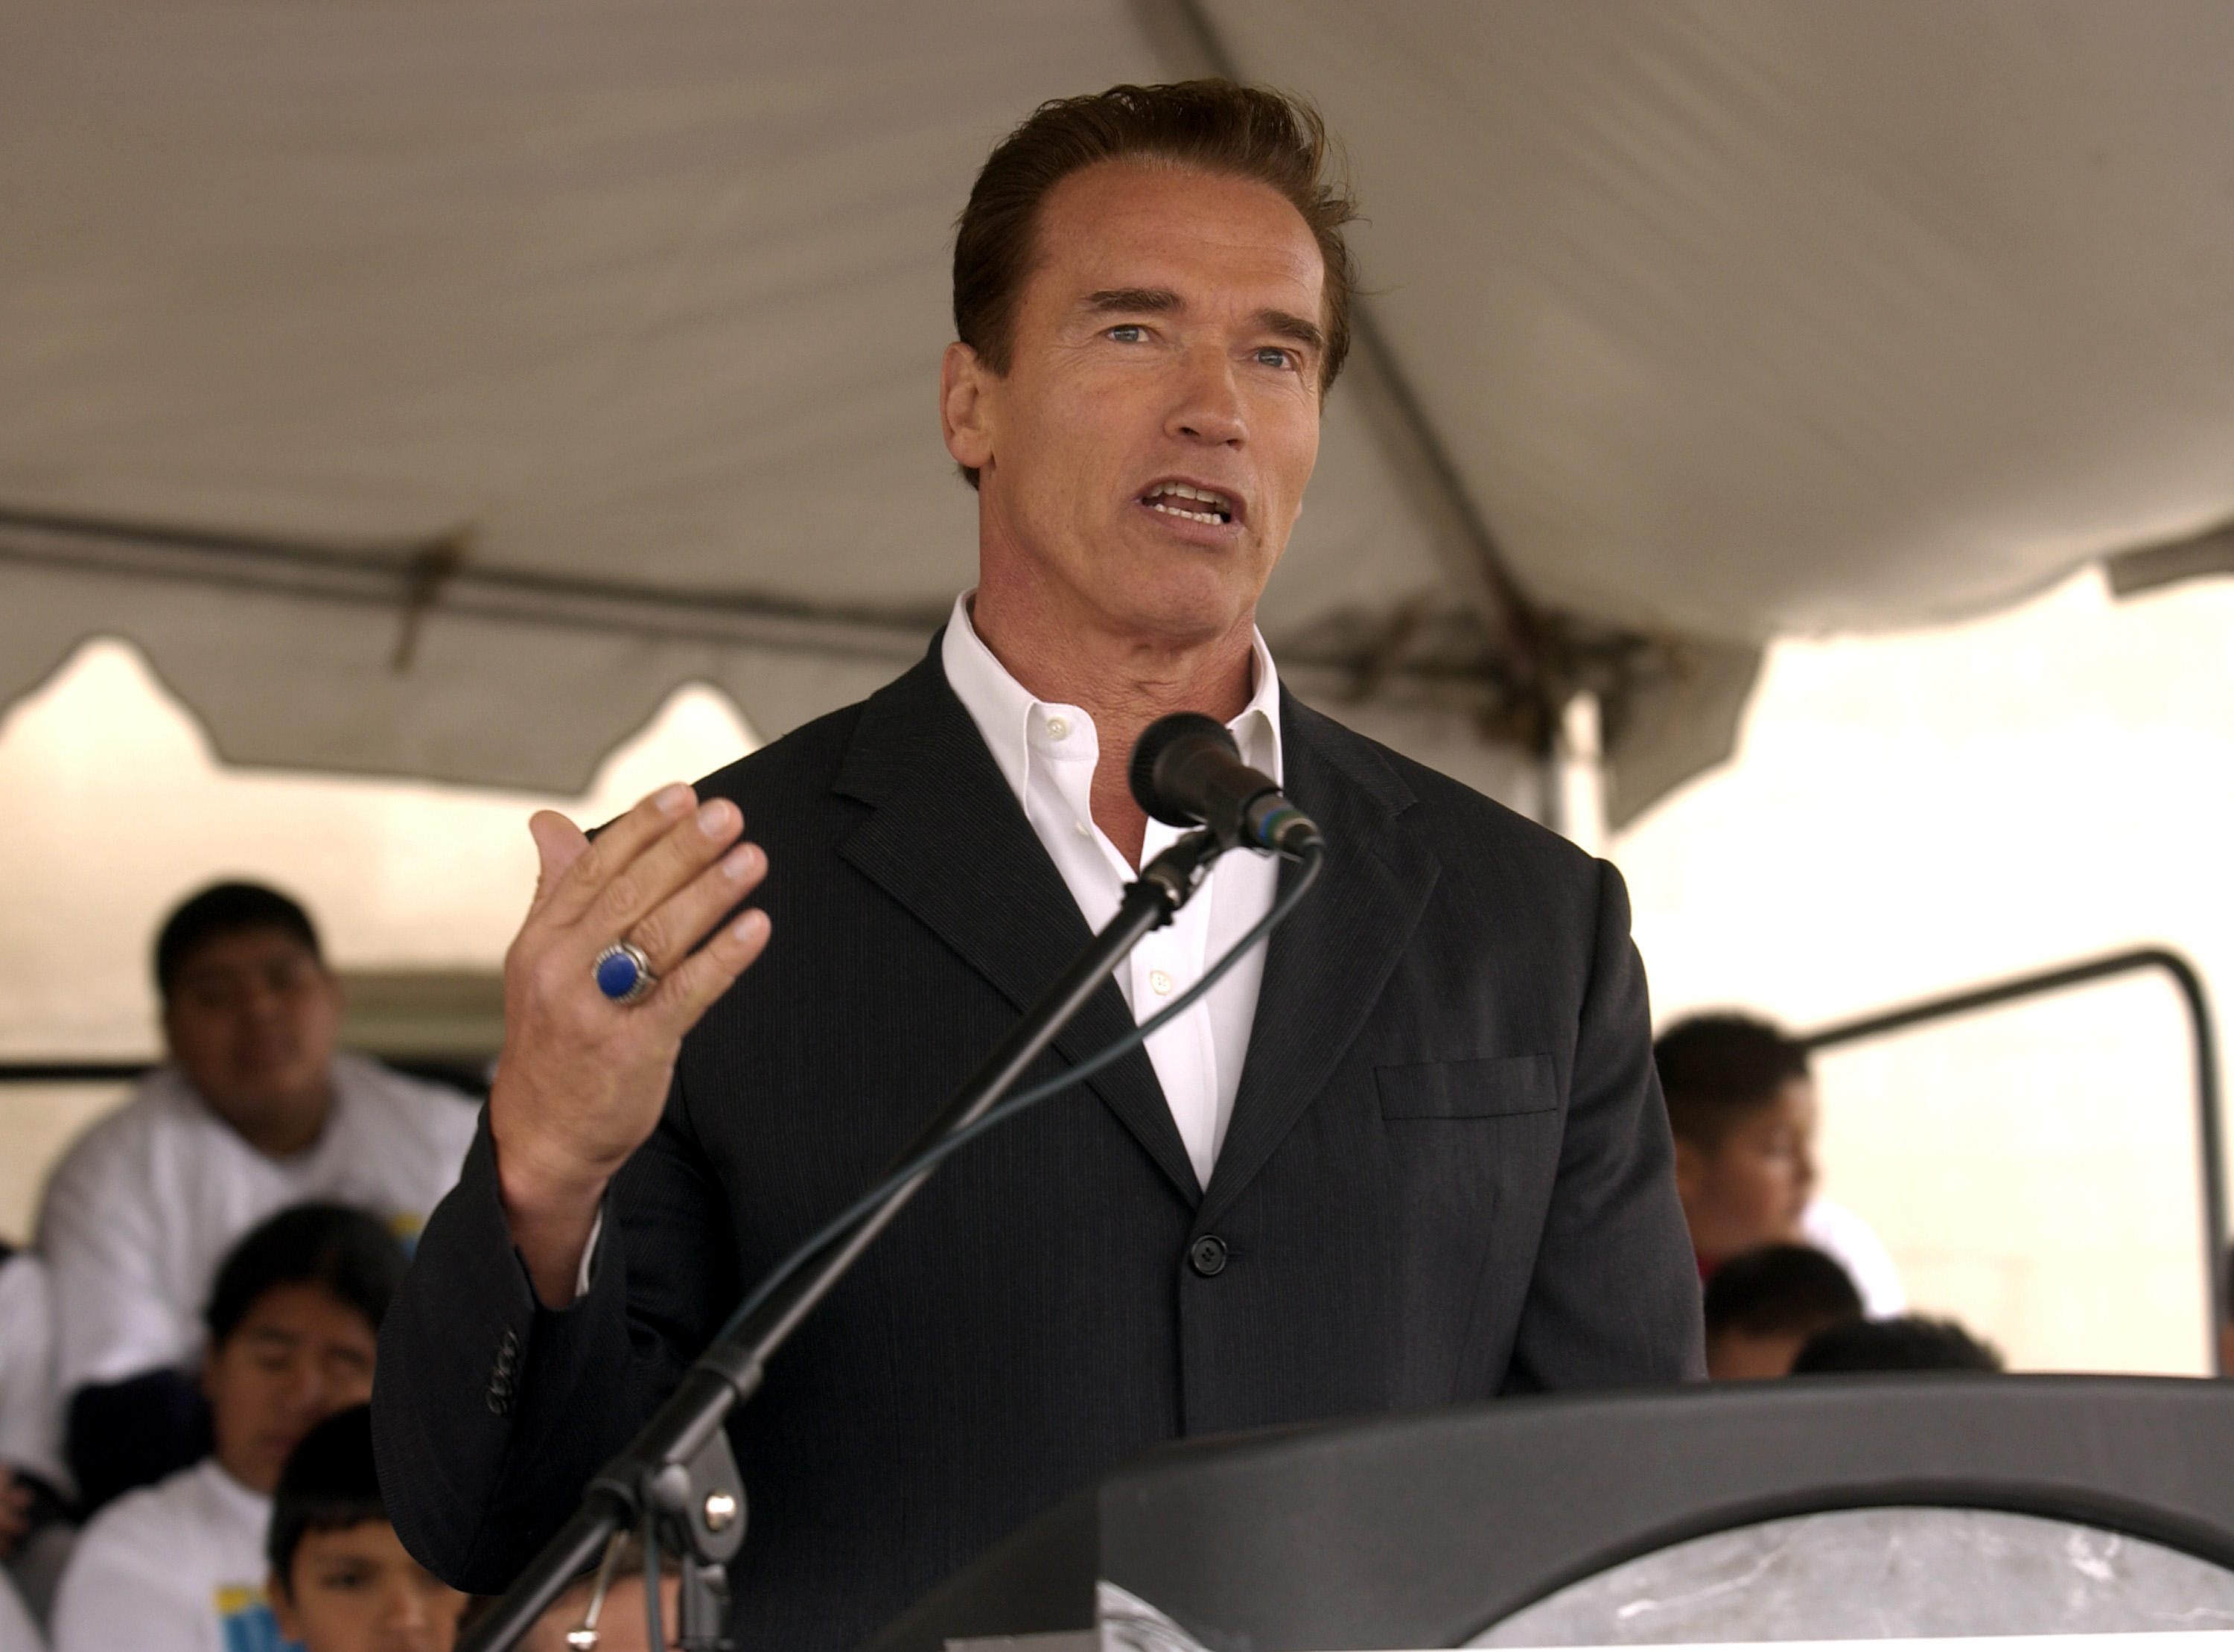 Arnold Schwarzenegger praised for message condemning the Capitol riot